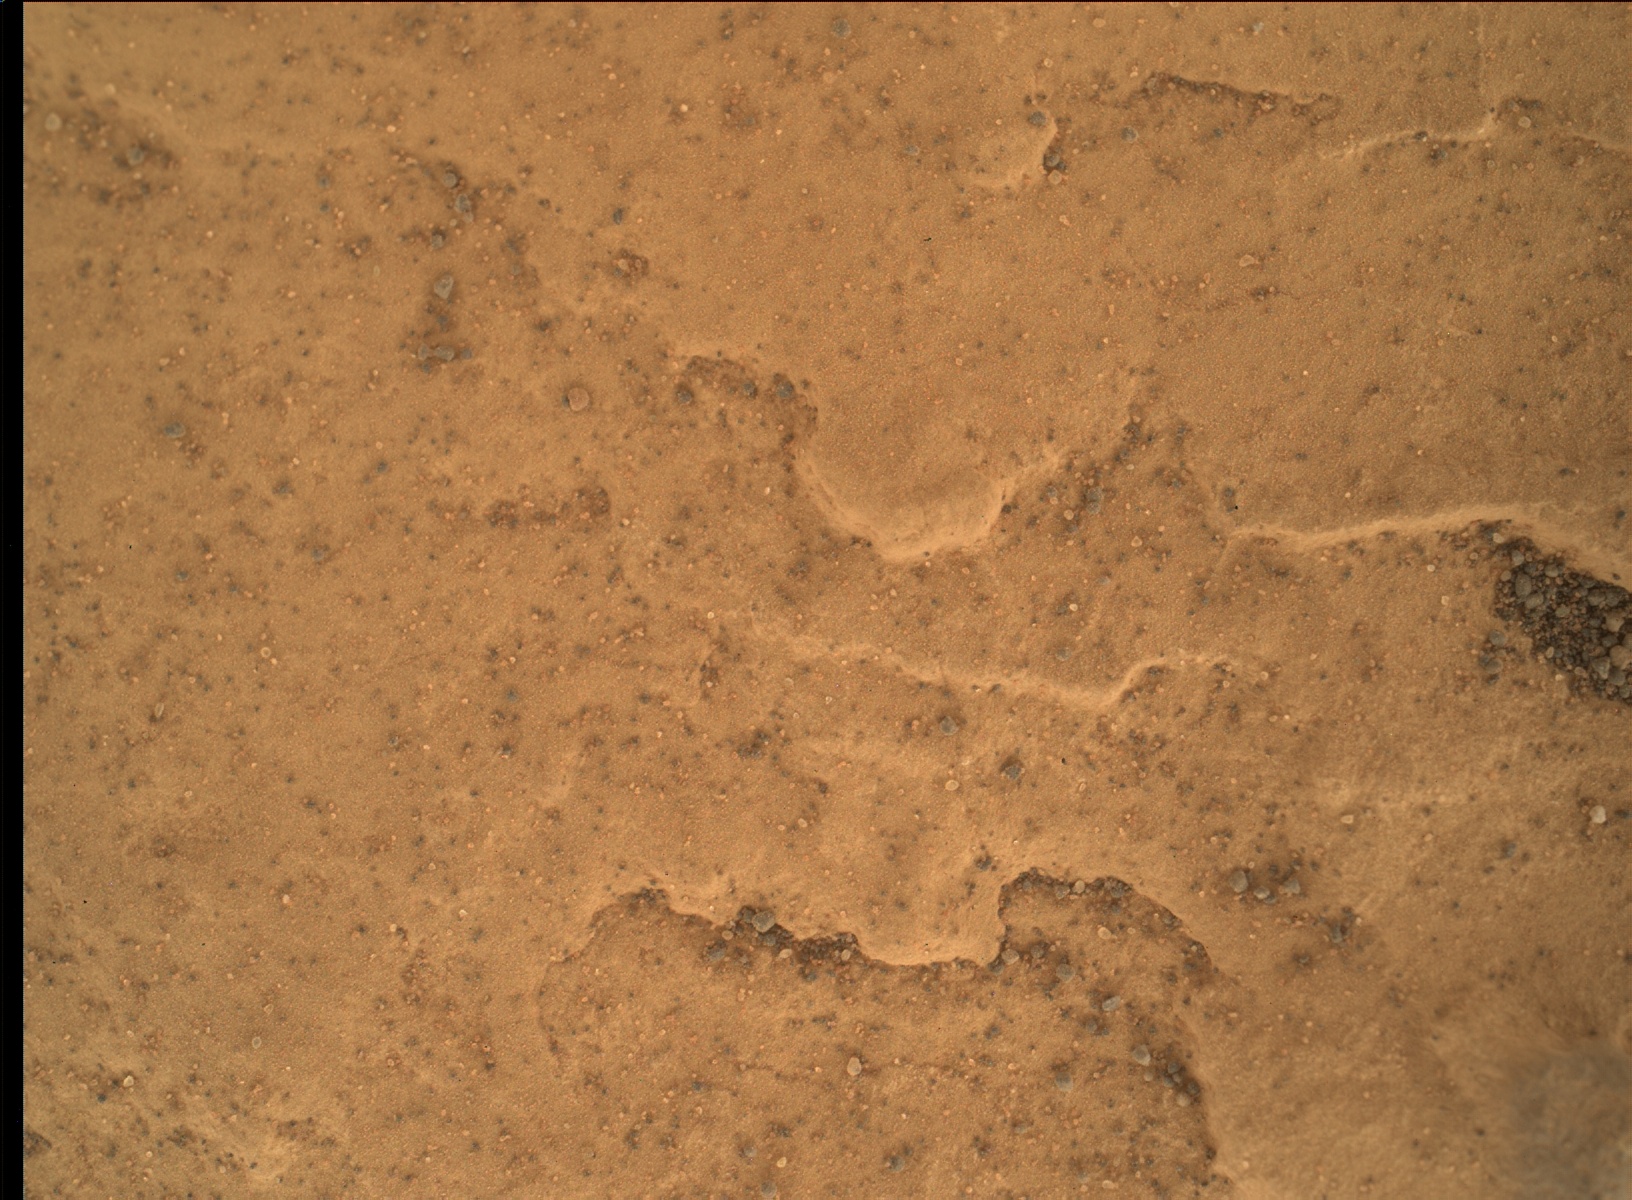 Nasa's Mars rover Curiosity acquired this image using its Mars Hand Lens Imager (MAHLI) on Sol 1700